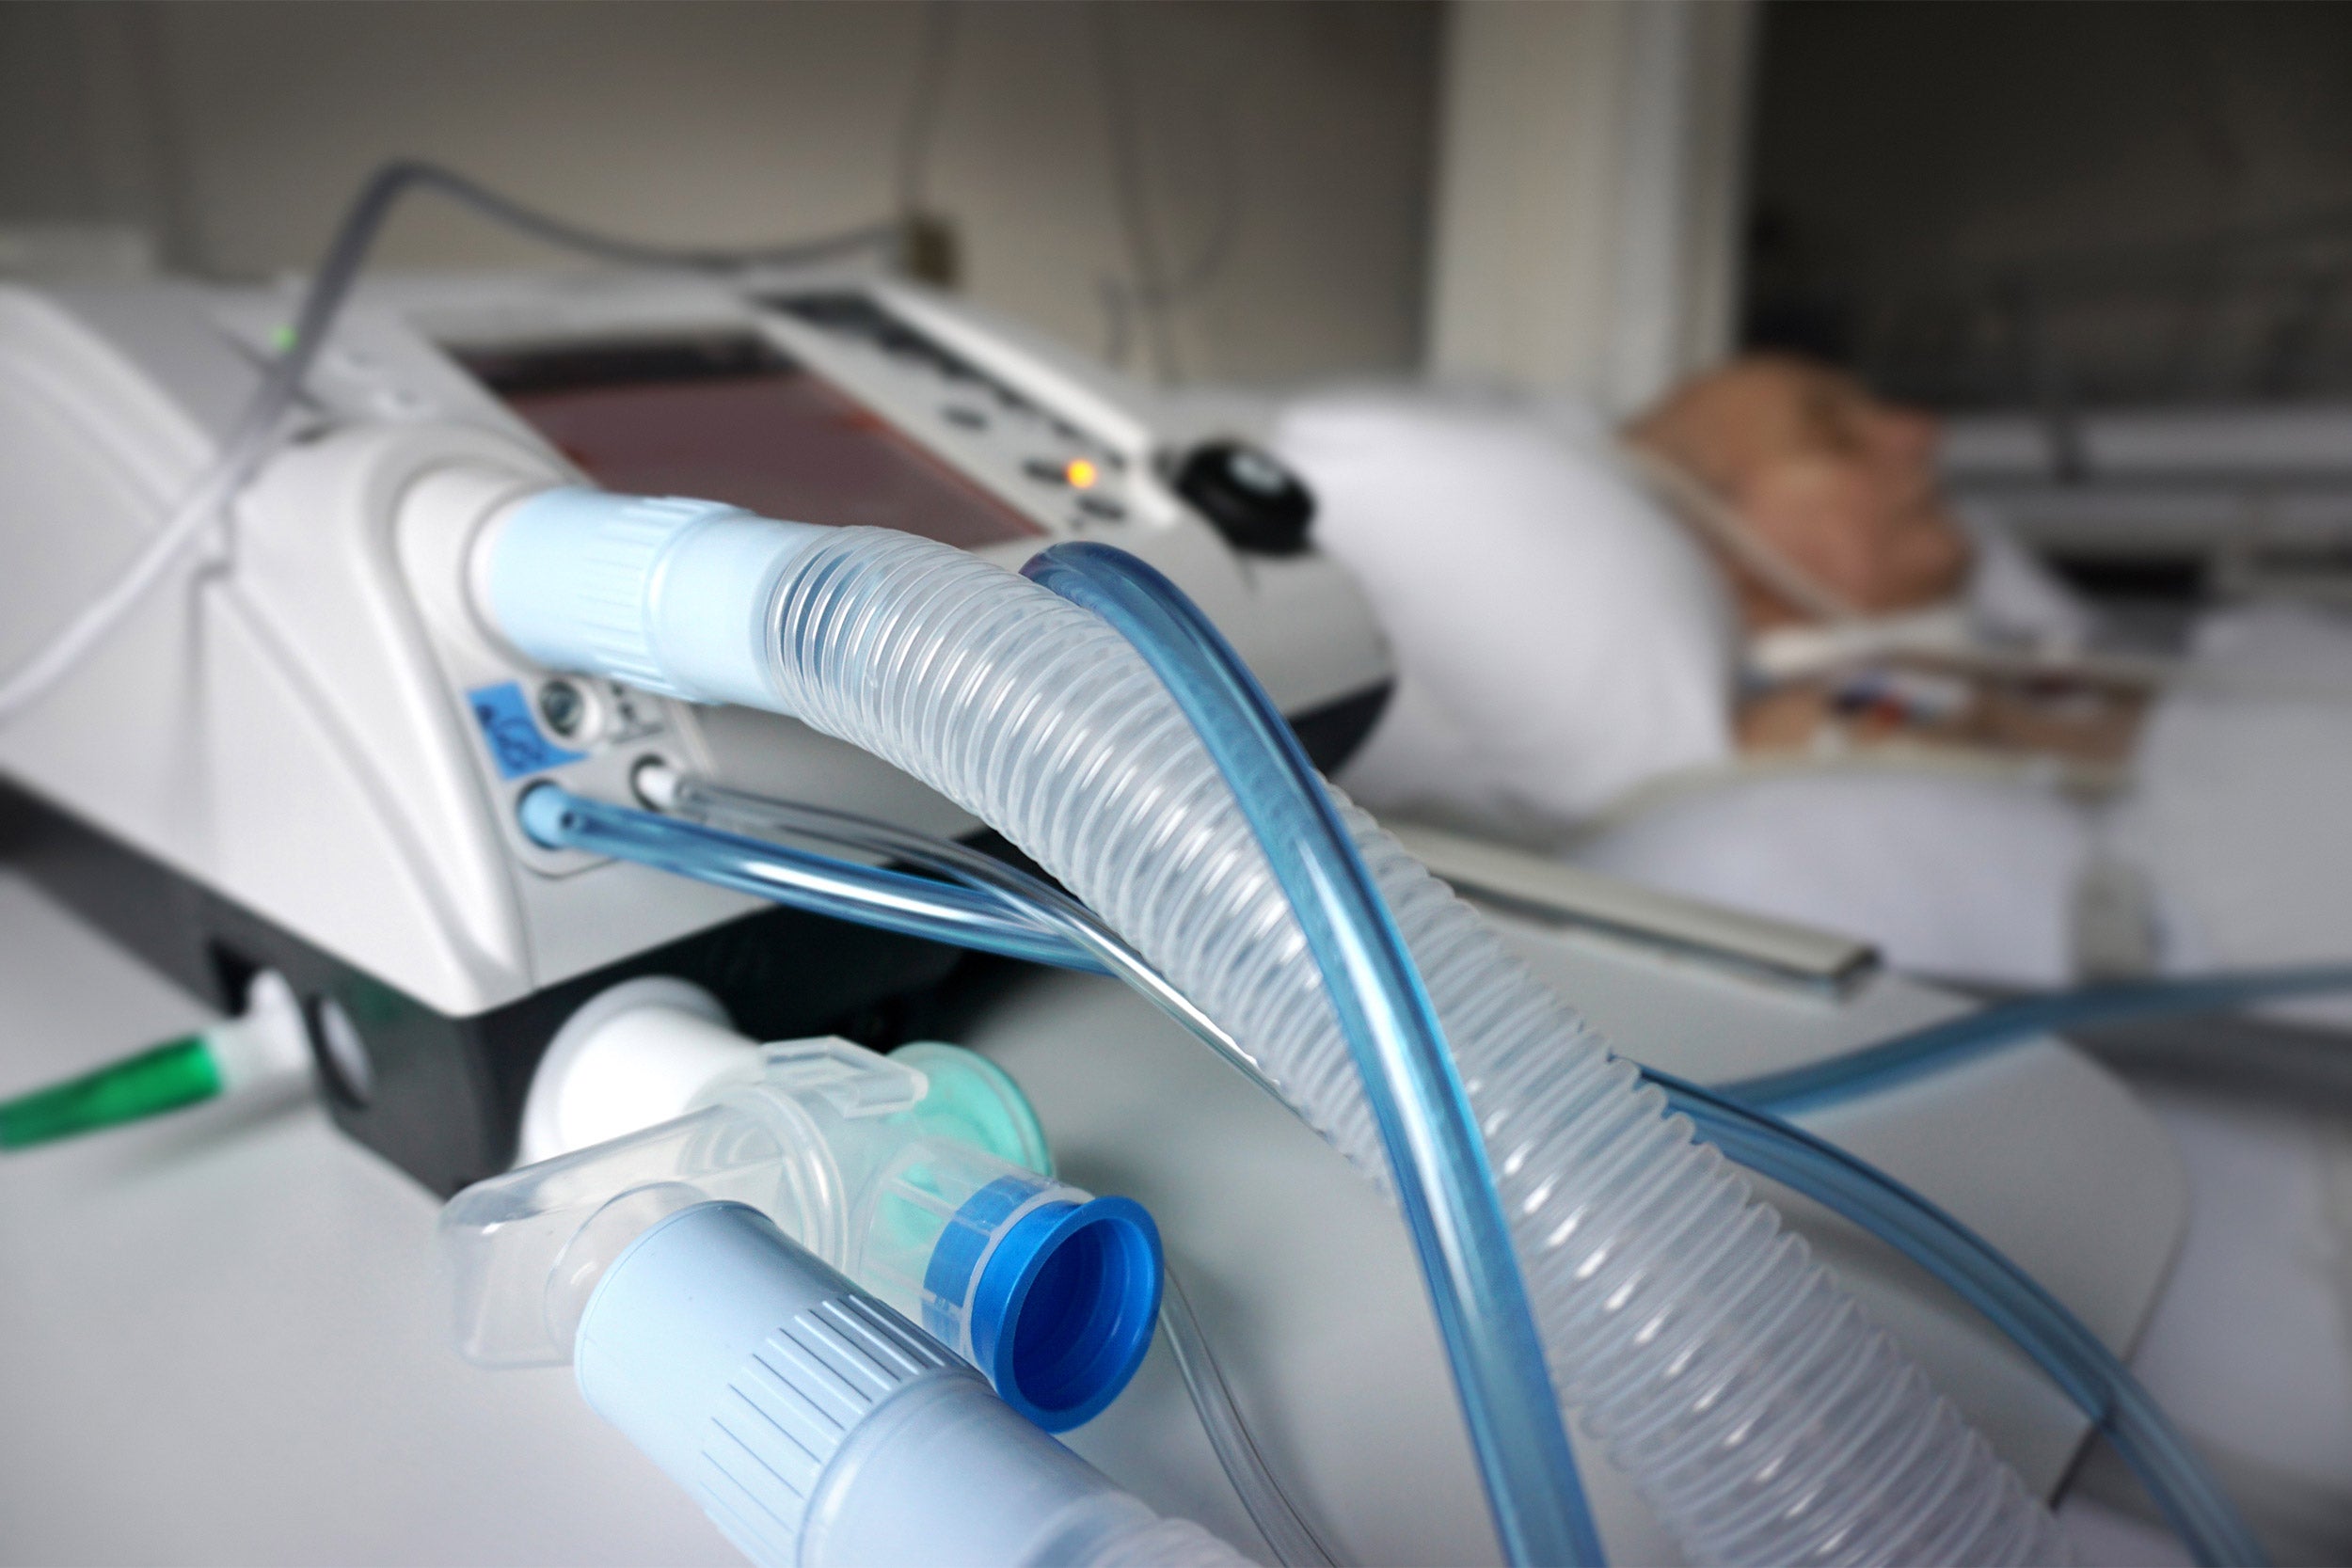 What is a ventilator? The 'critical resource' that is in short supply